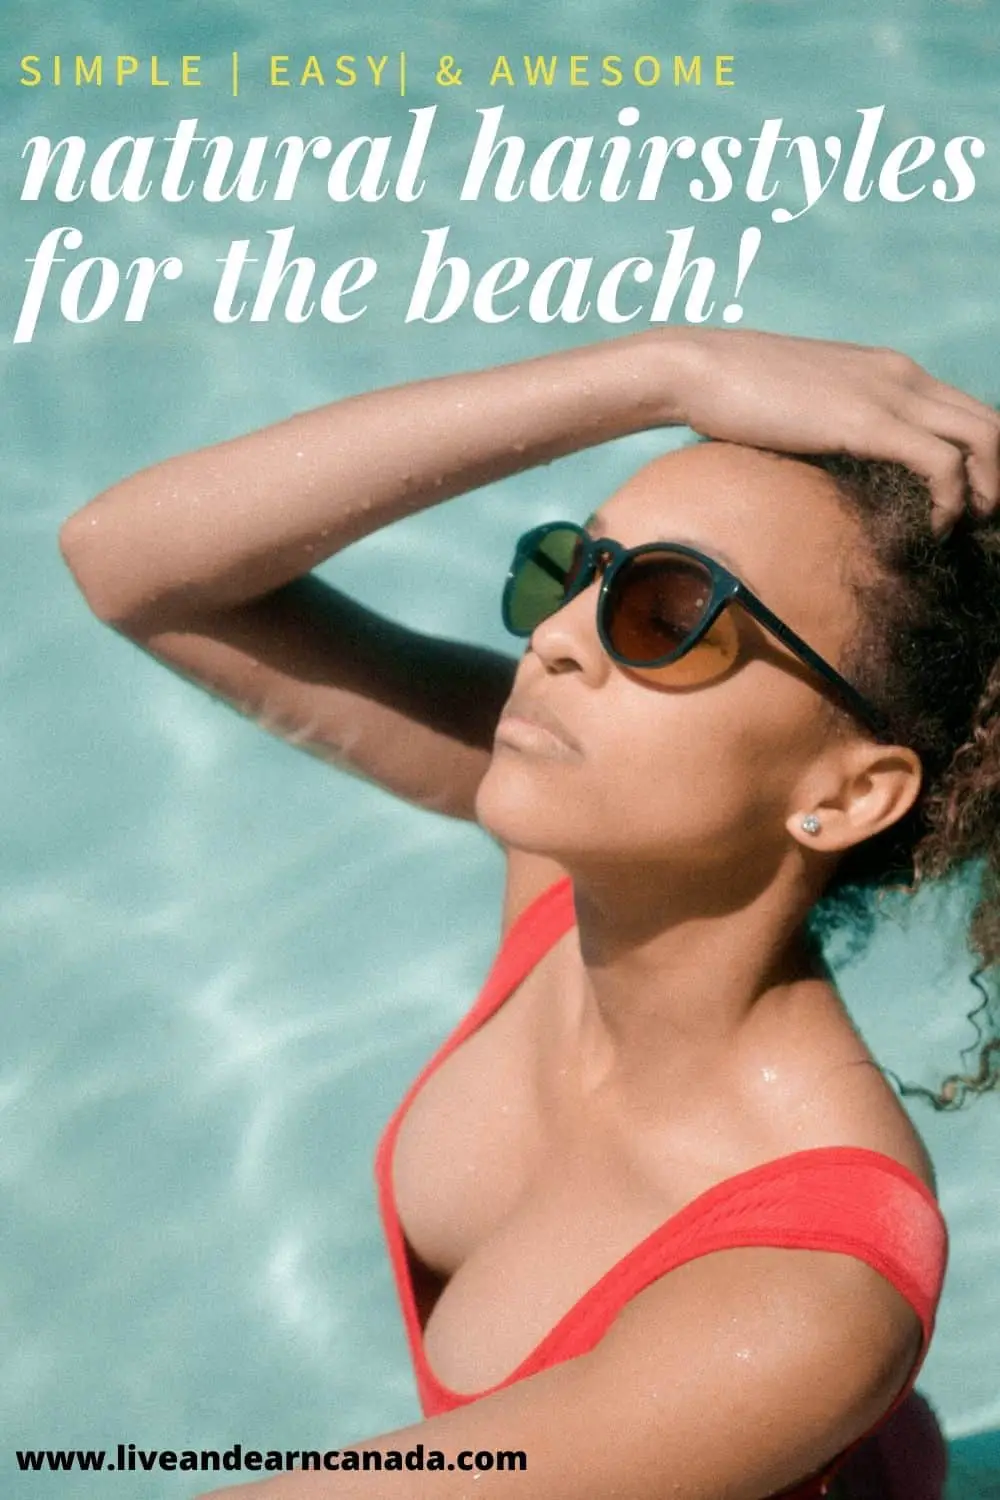 Here a few natural hairstyles for the beach to try out! What are some of the best natural hairstyles for swimming? Here is a list of the best natural hairstyles for black women that are going on vacation. Here is how to take care of your natural hair while on vacation by wearing protective styles like crochet braids, cornrows and more #naturalhair #protectivestyle